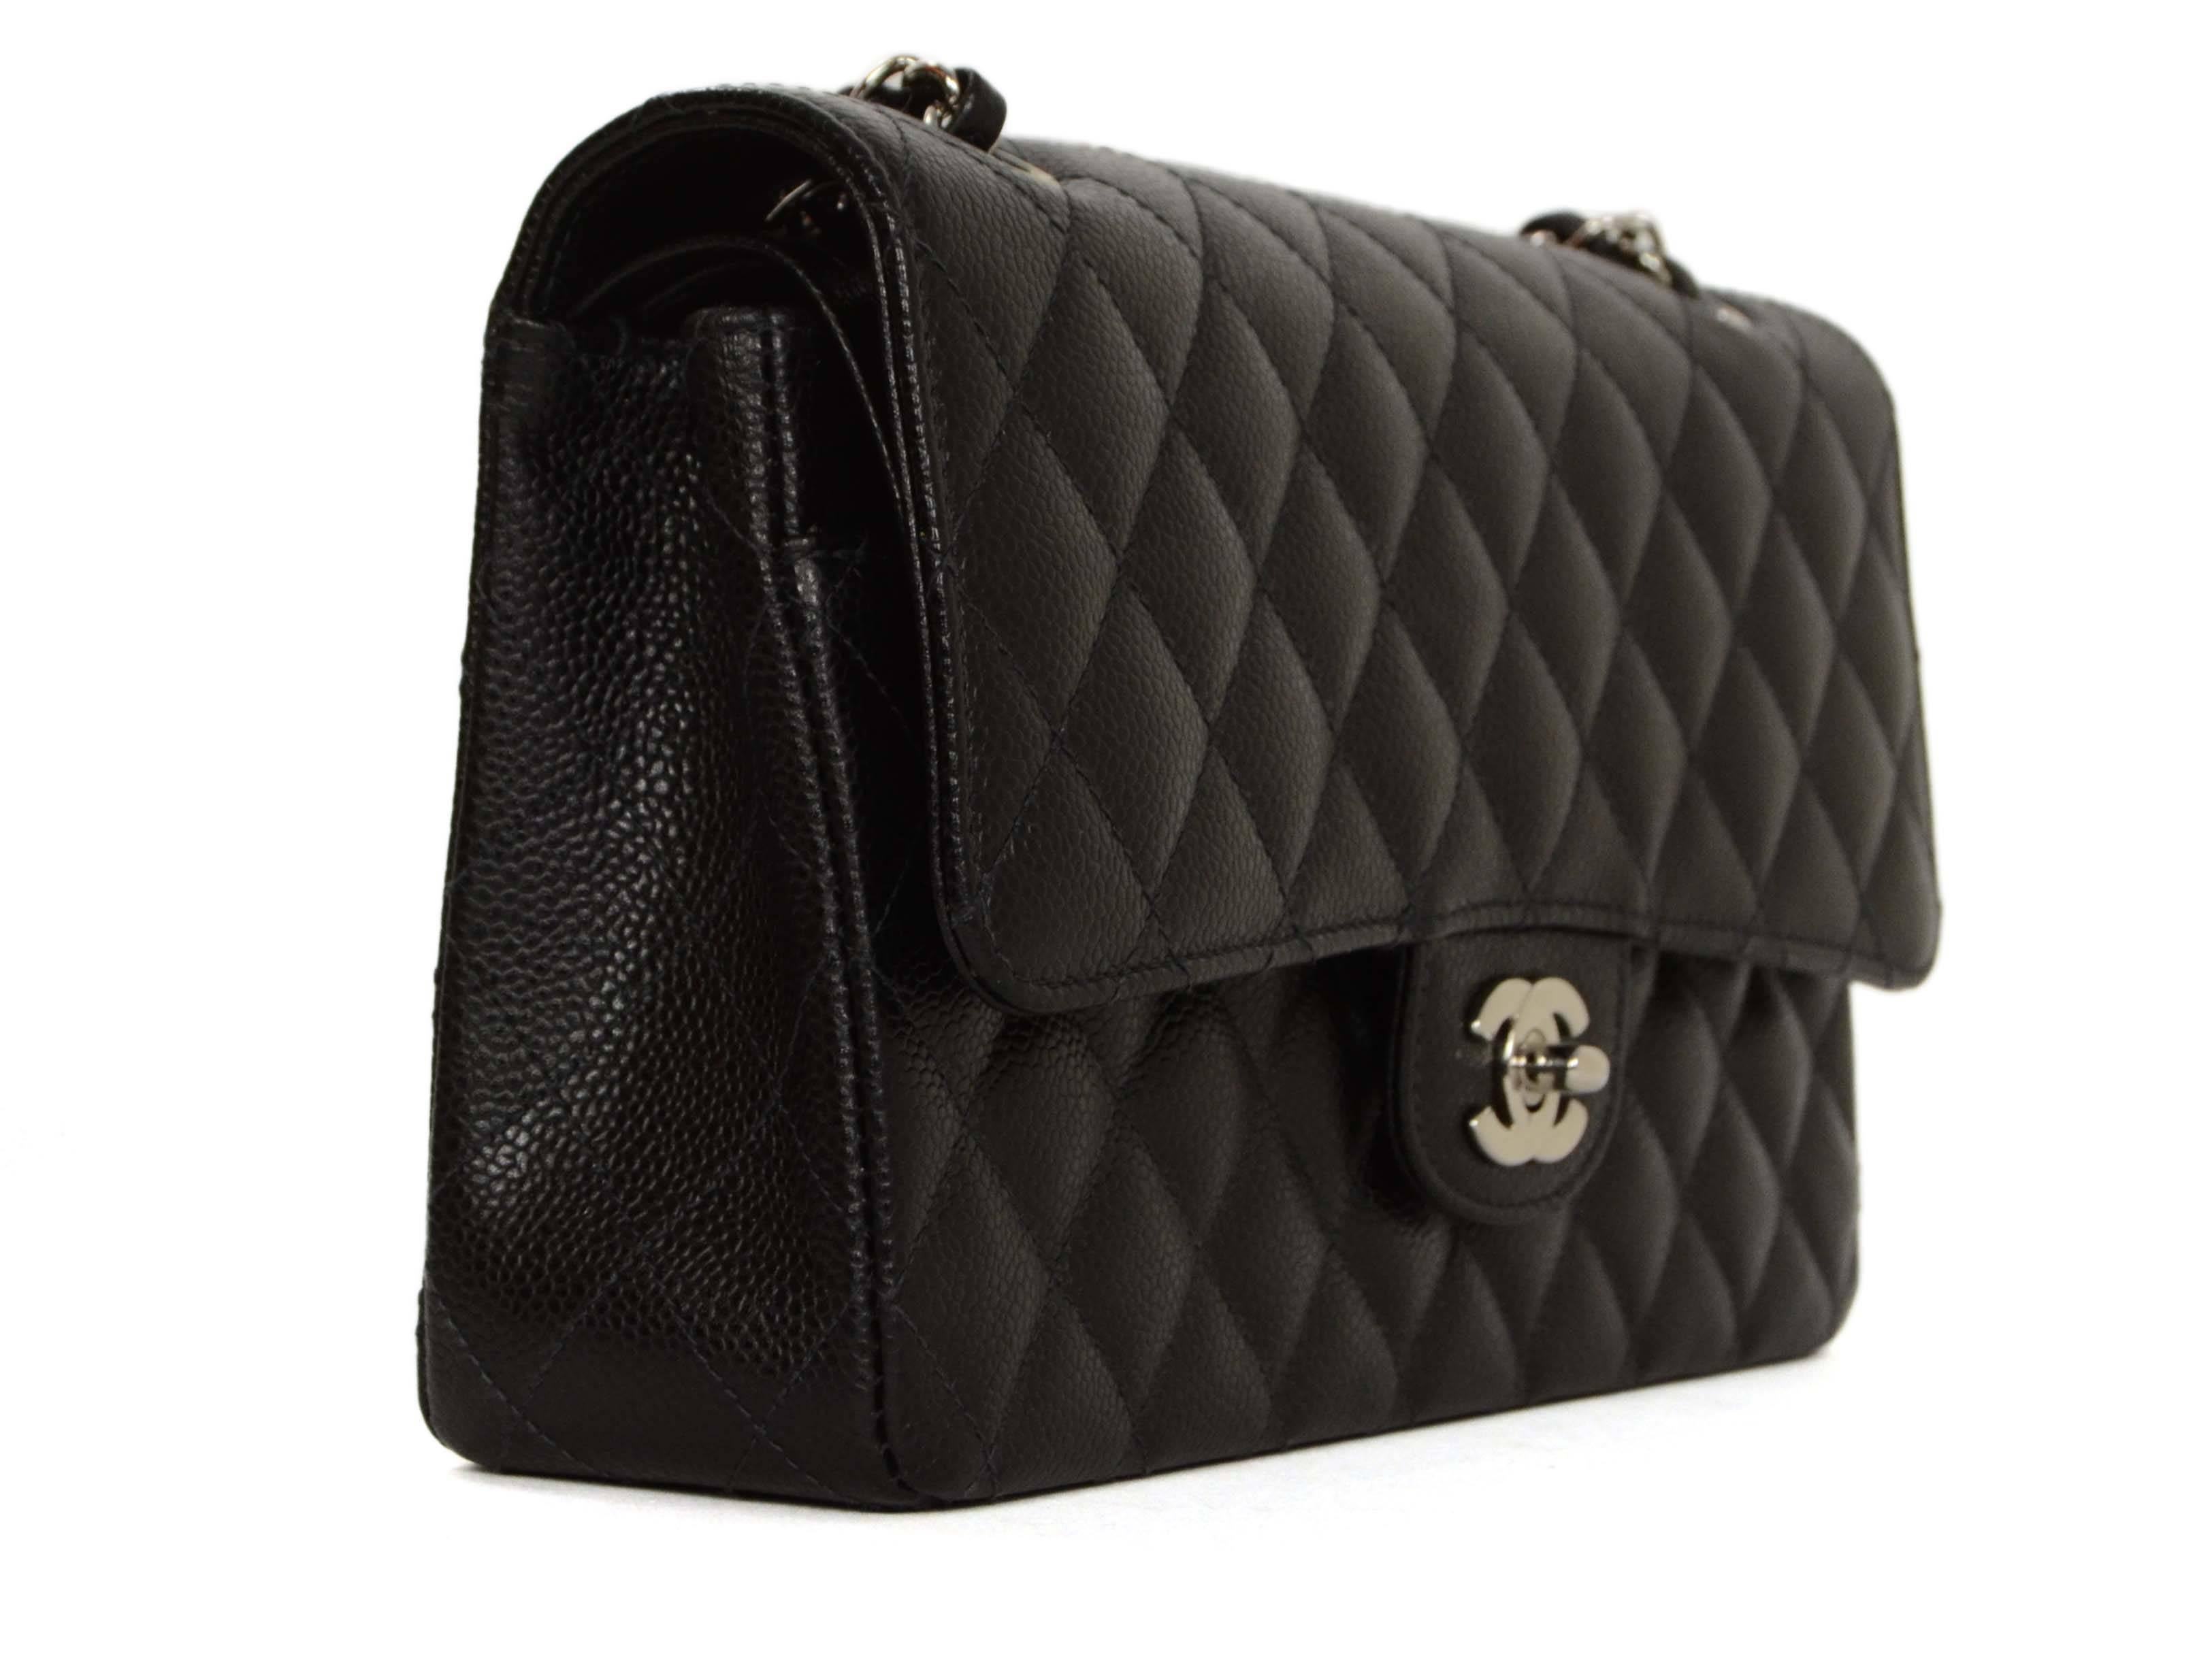 Chanel Black Quilted Caviar Double Flap Medium Classic Bag
Features adjustable chain that can be would doubled  on the shoulder or singled.

    Made In: France

    Year of Production: 2005

    Color: Black

    Hardware: Silver

   